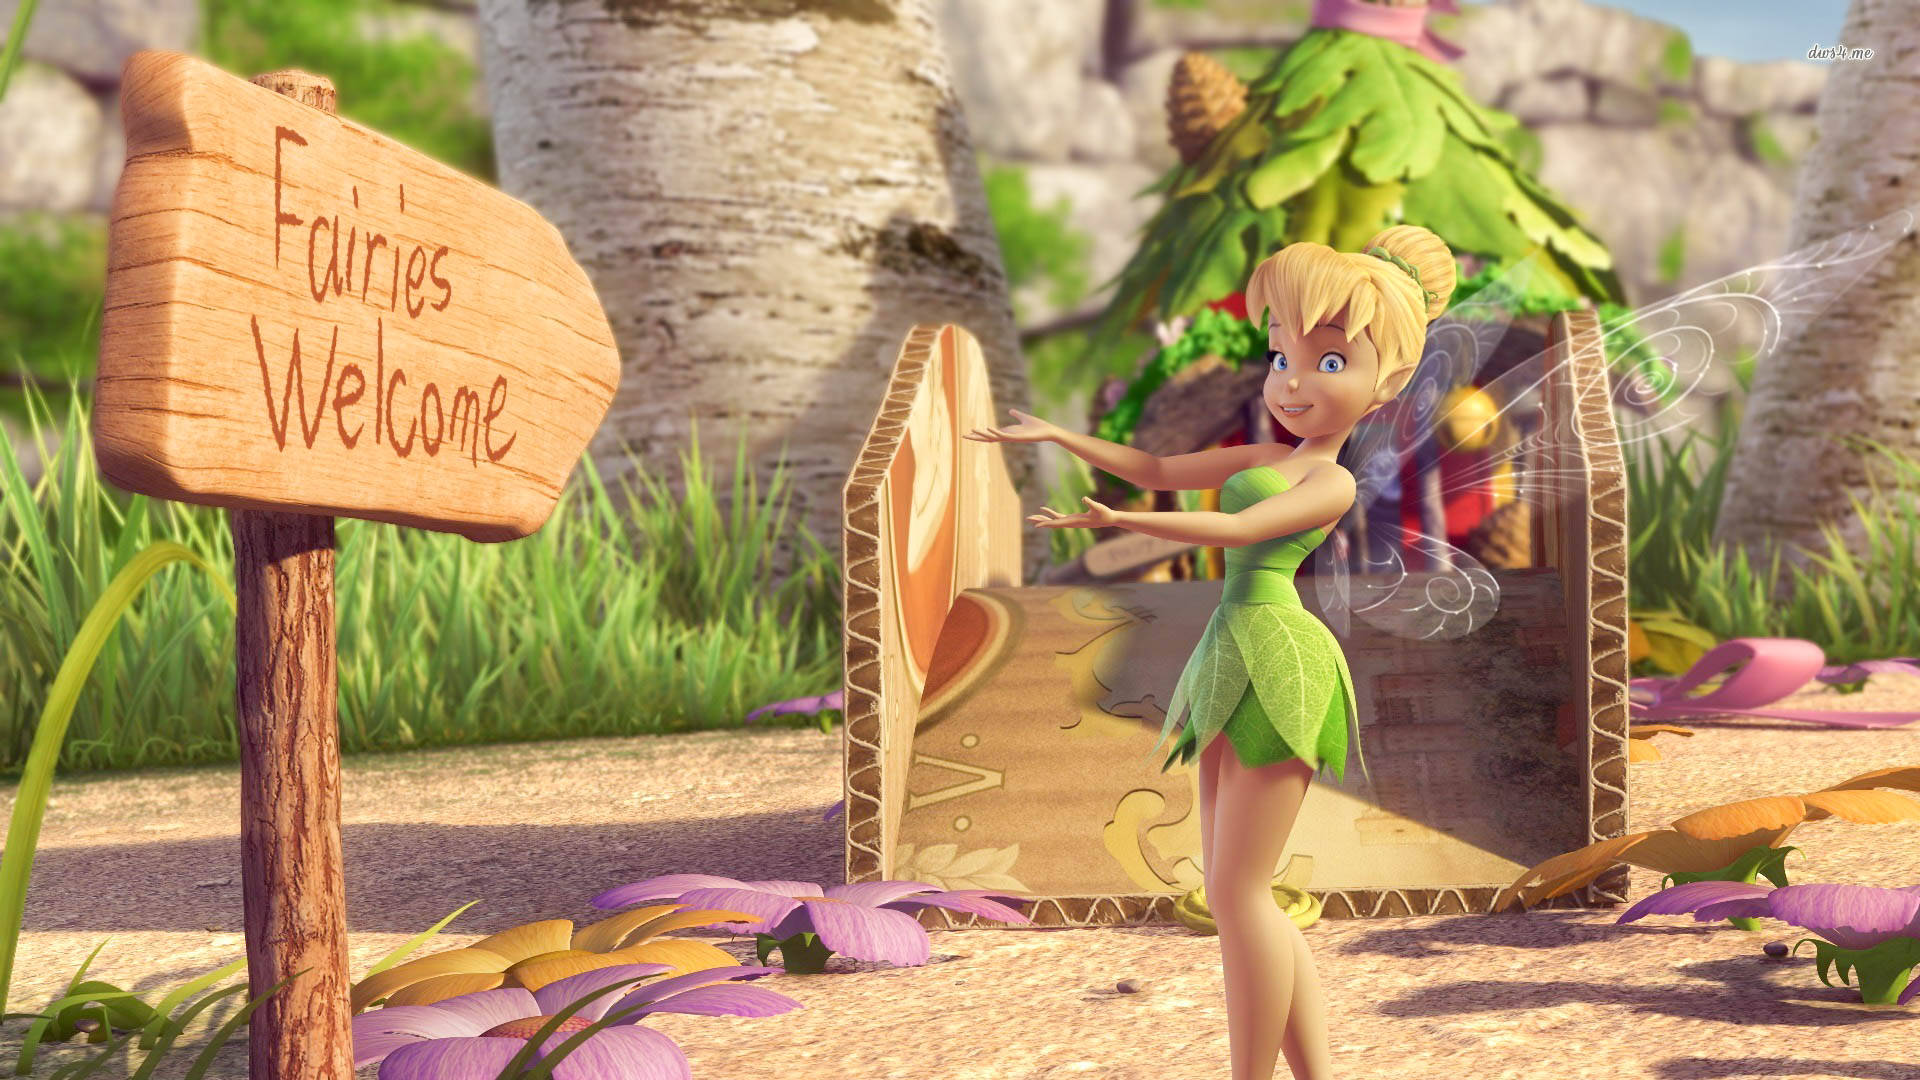 Tinker Bell With Greeting Sign Wallpaper